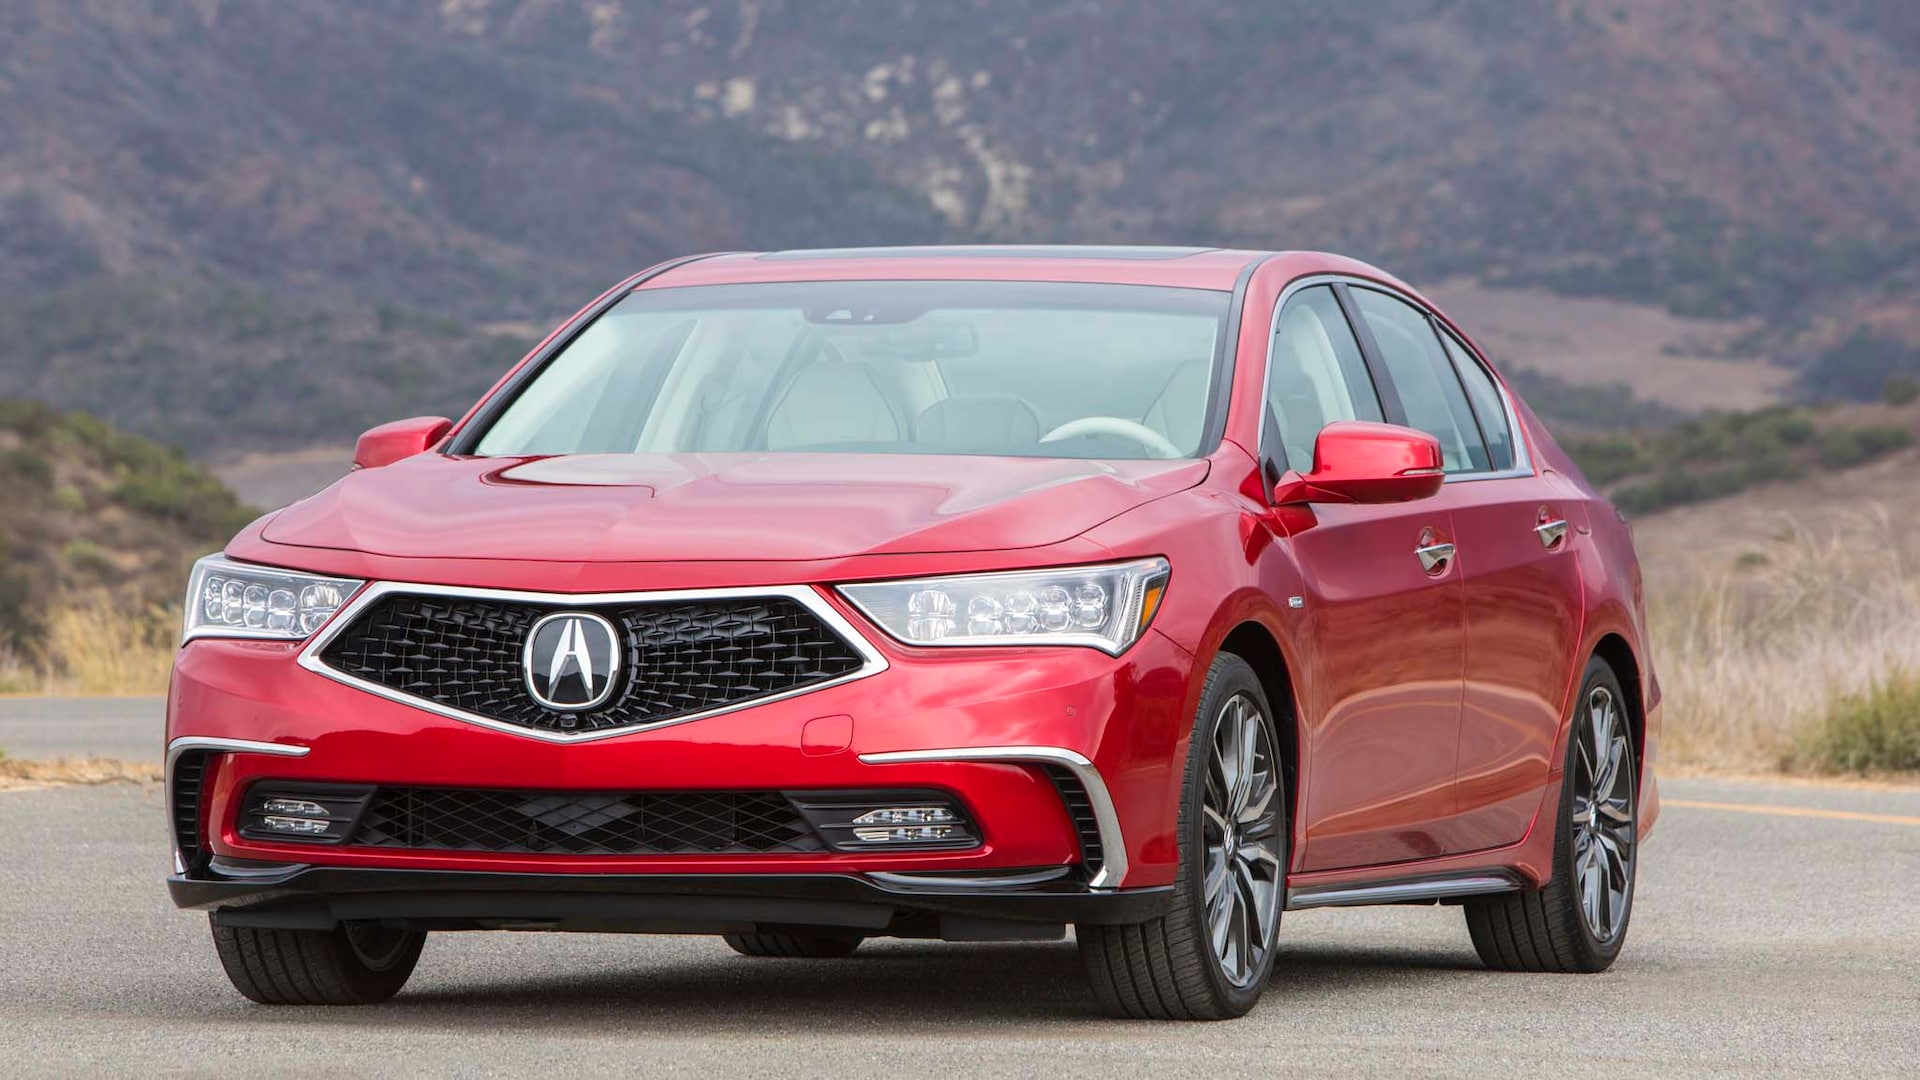 Hi-Diddly-Ho! Acura Just Put a $12,000 Discount on the RLX's Hood